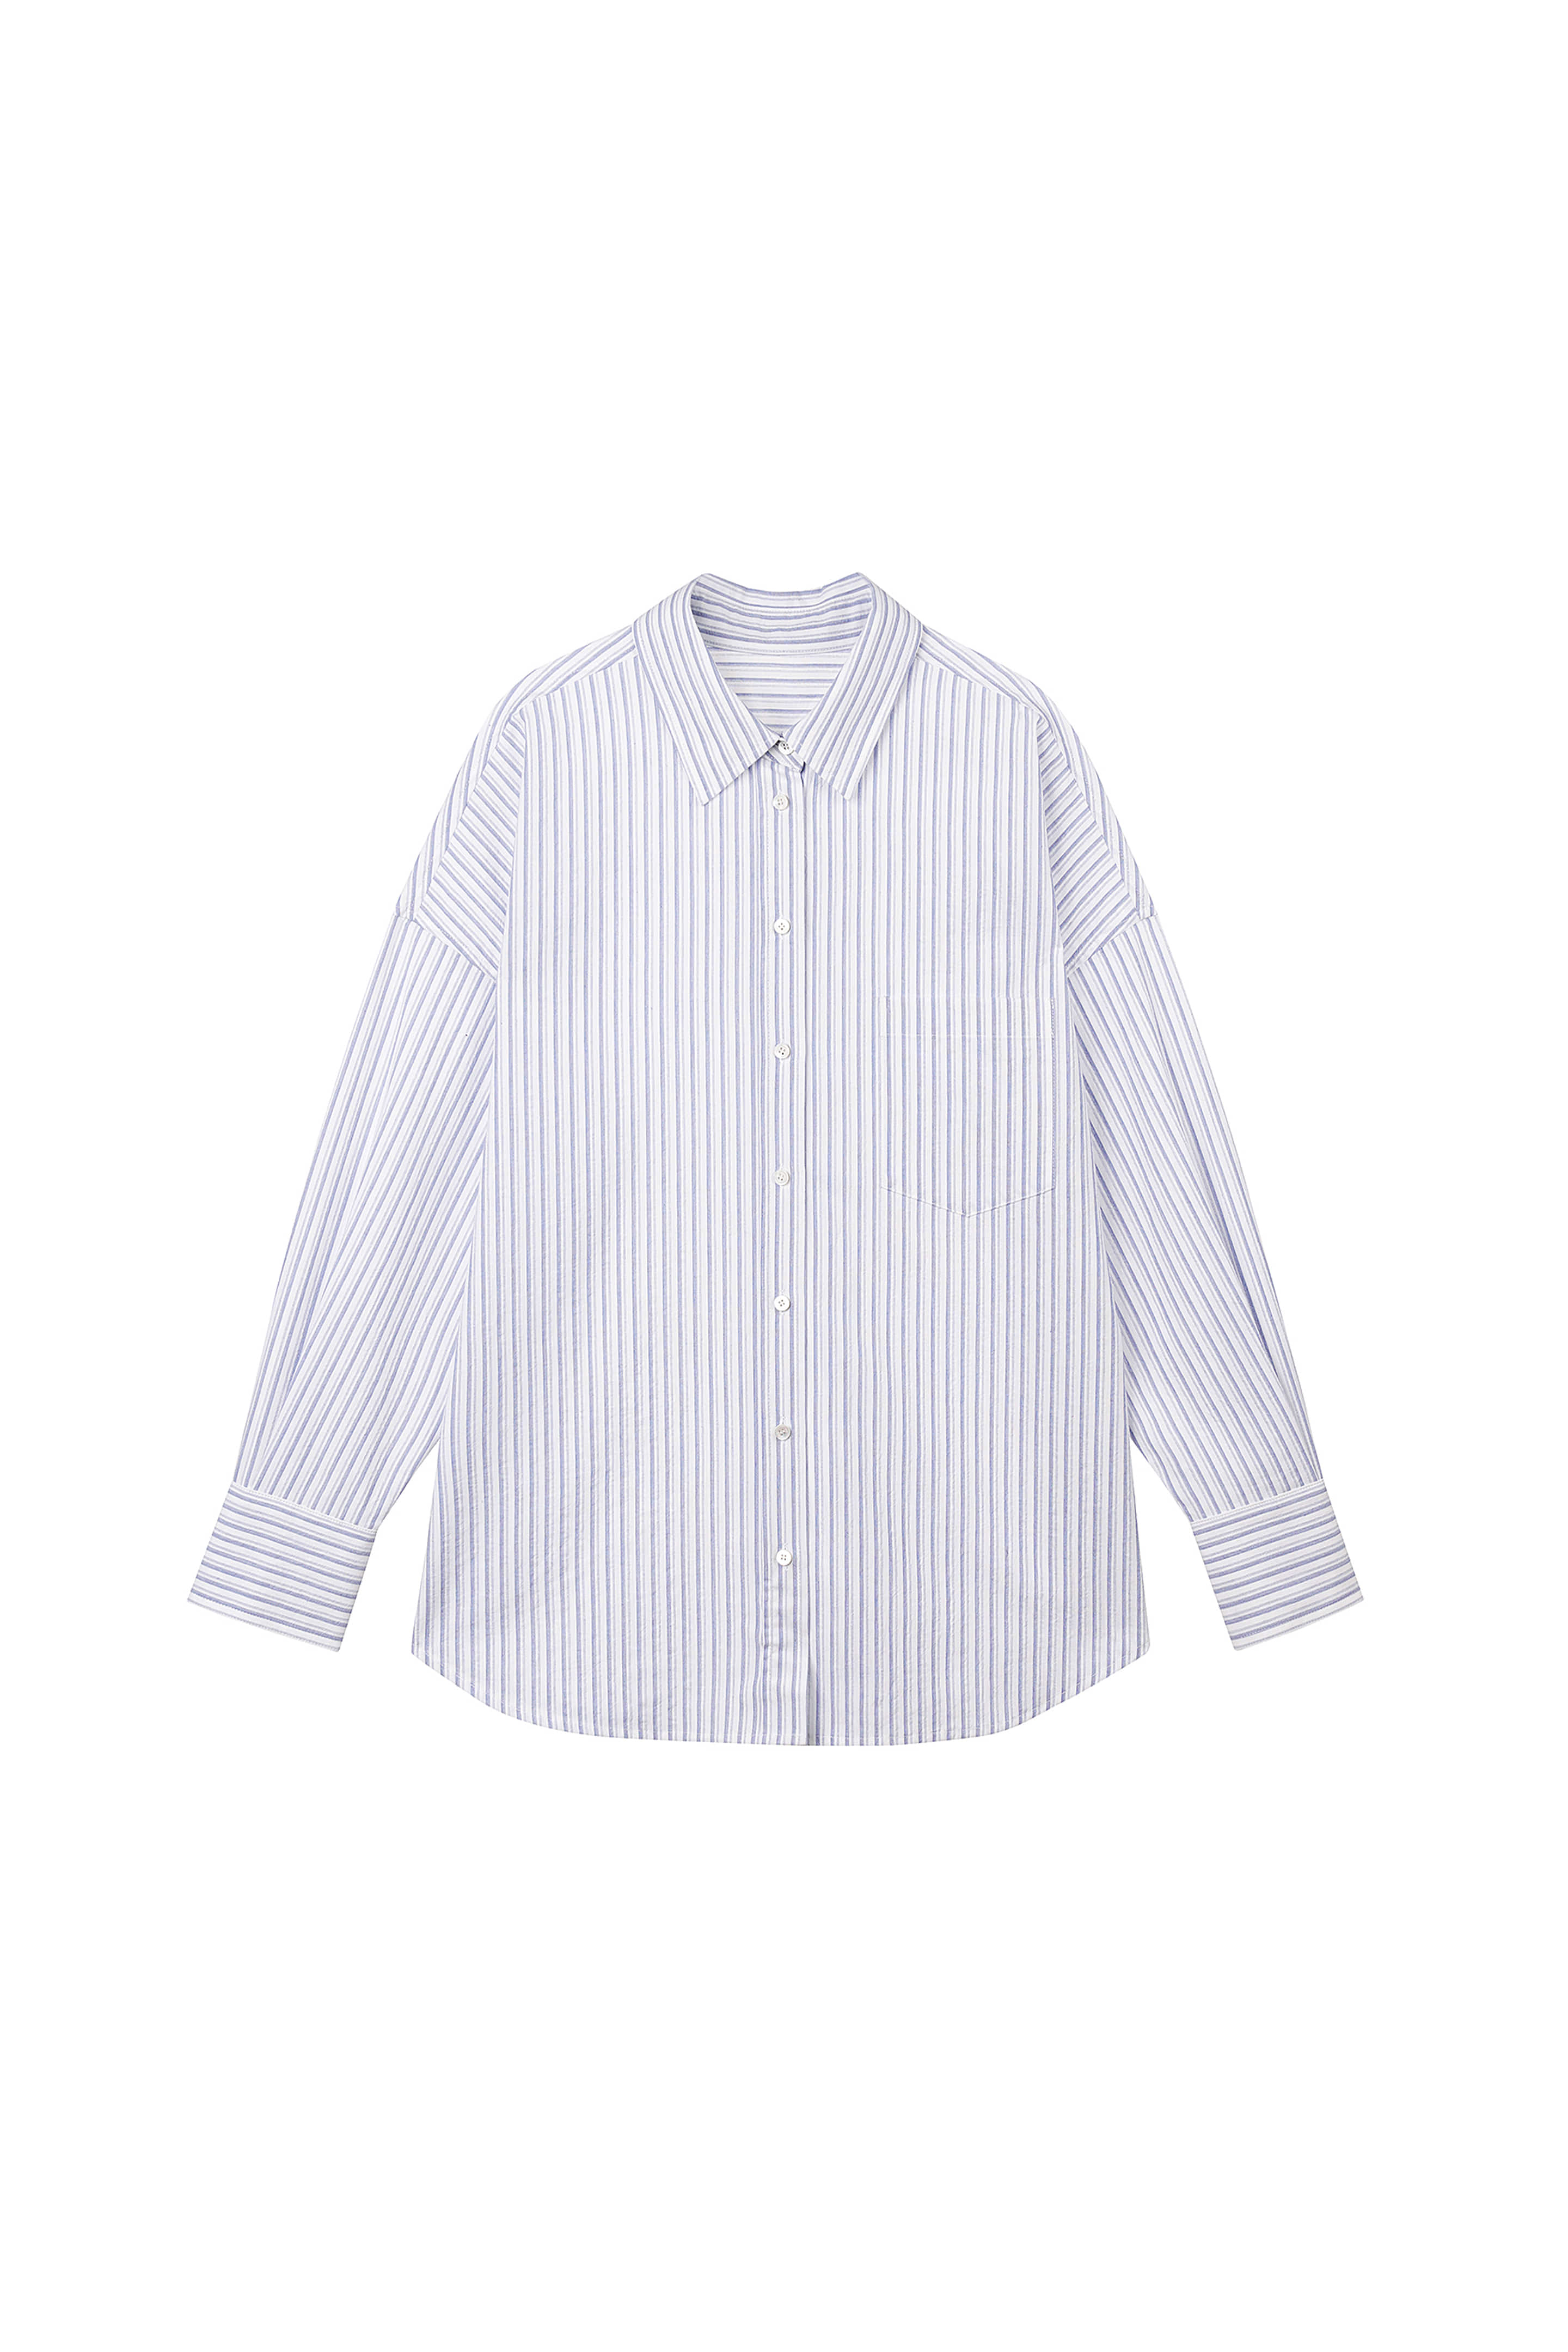 3rd) Cotton Shirts Stripe Over-sized Blue